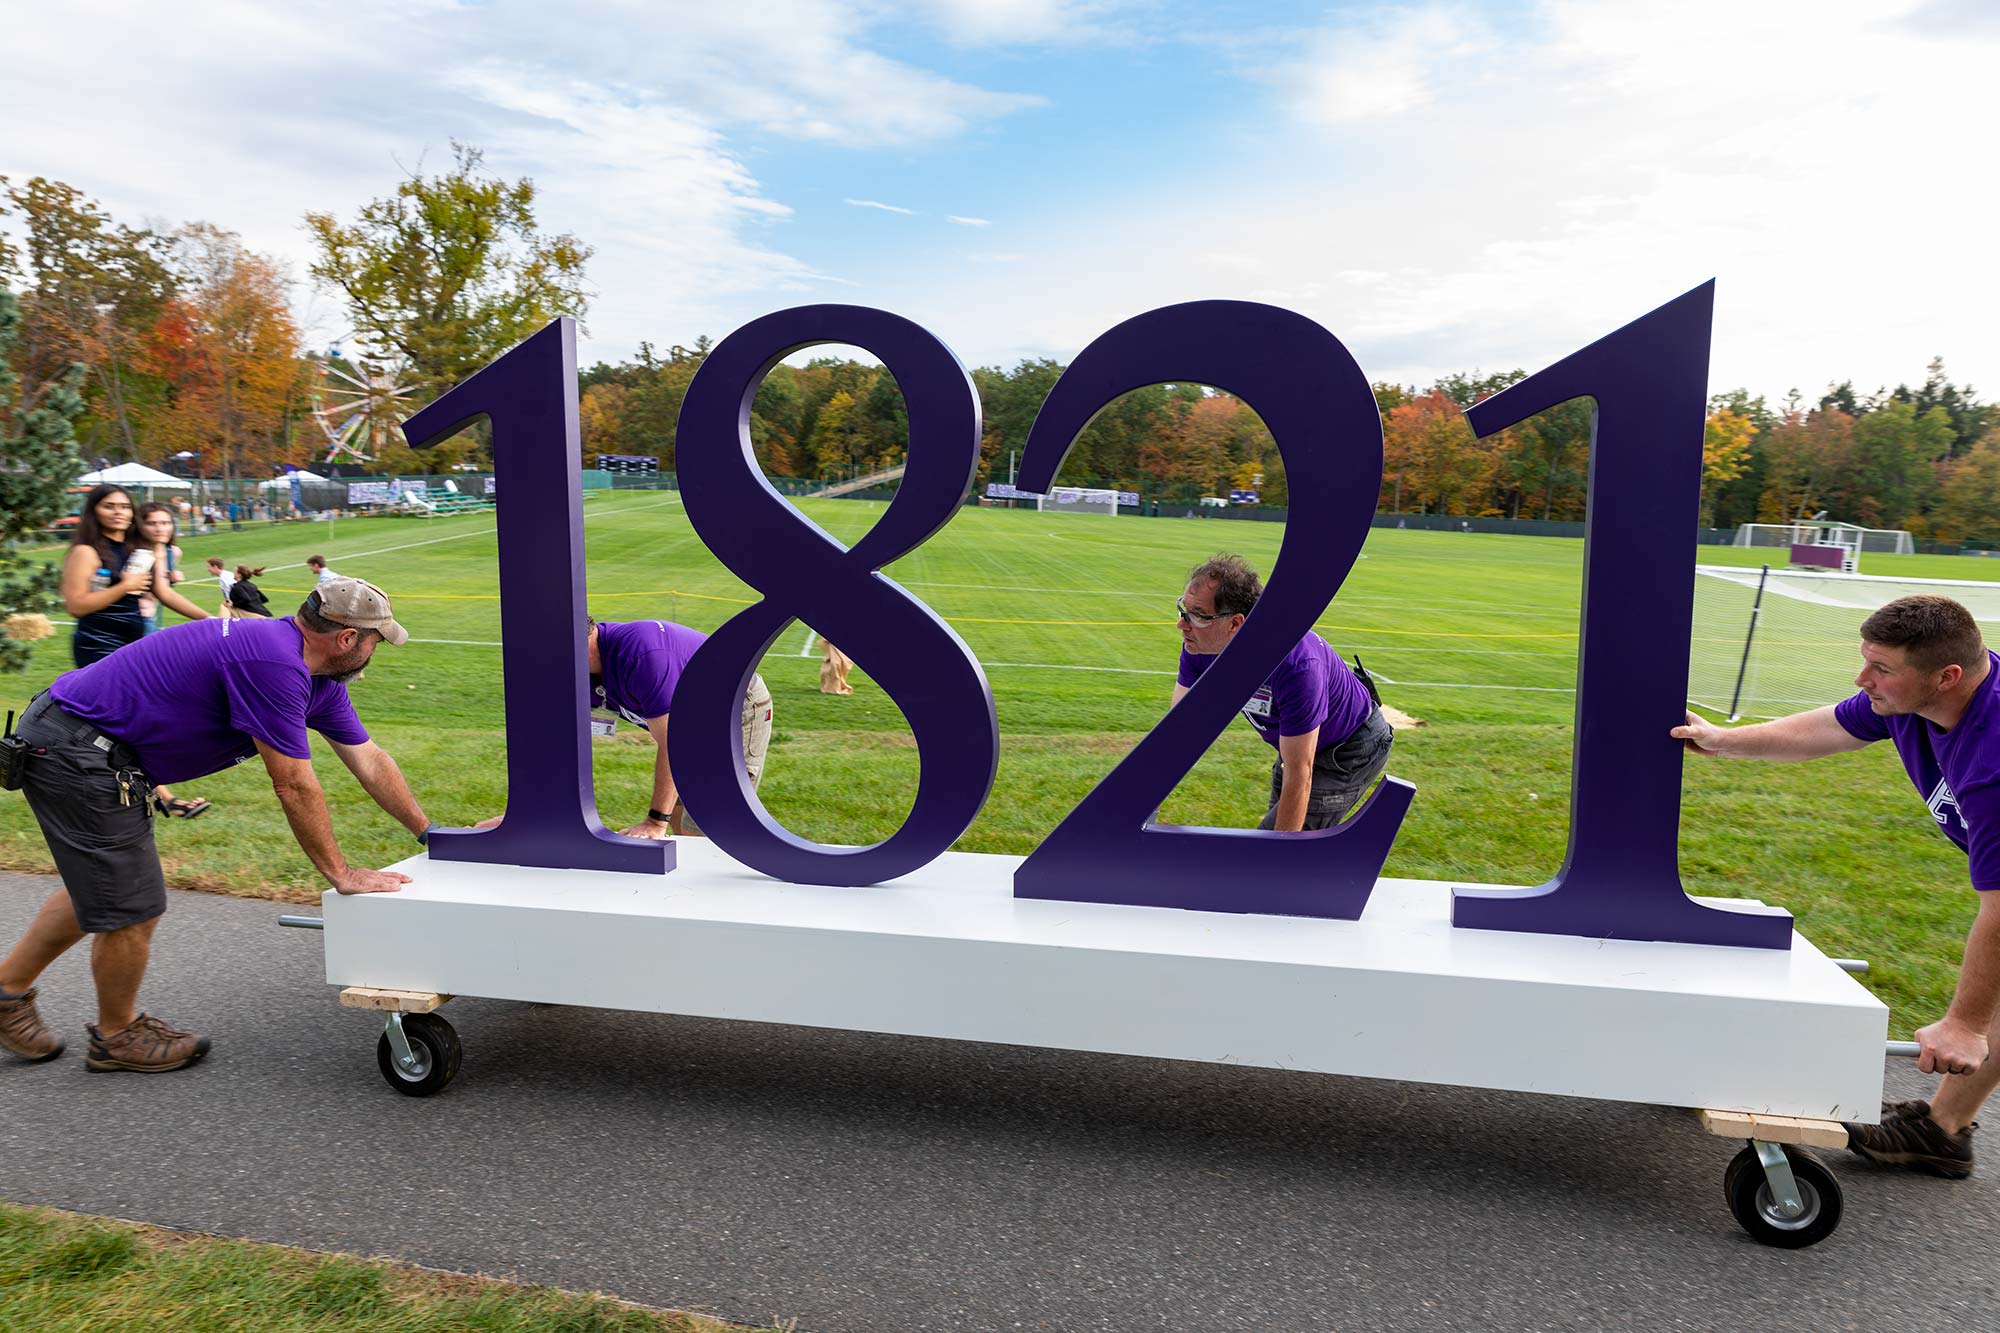 Amherst College staff moving the 1821 sculpture across campus for the bicentennial party